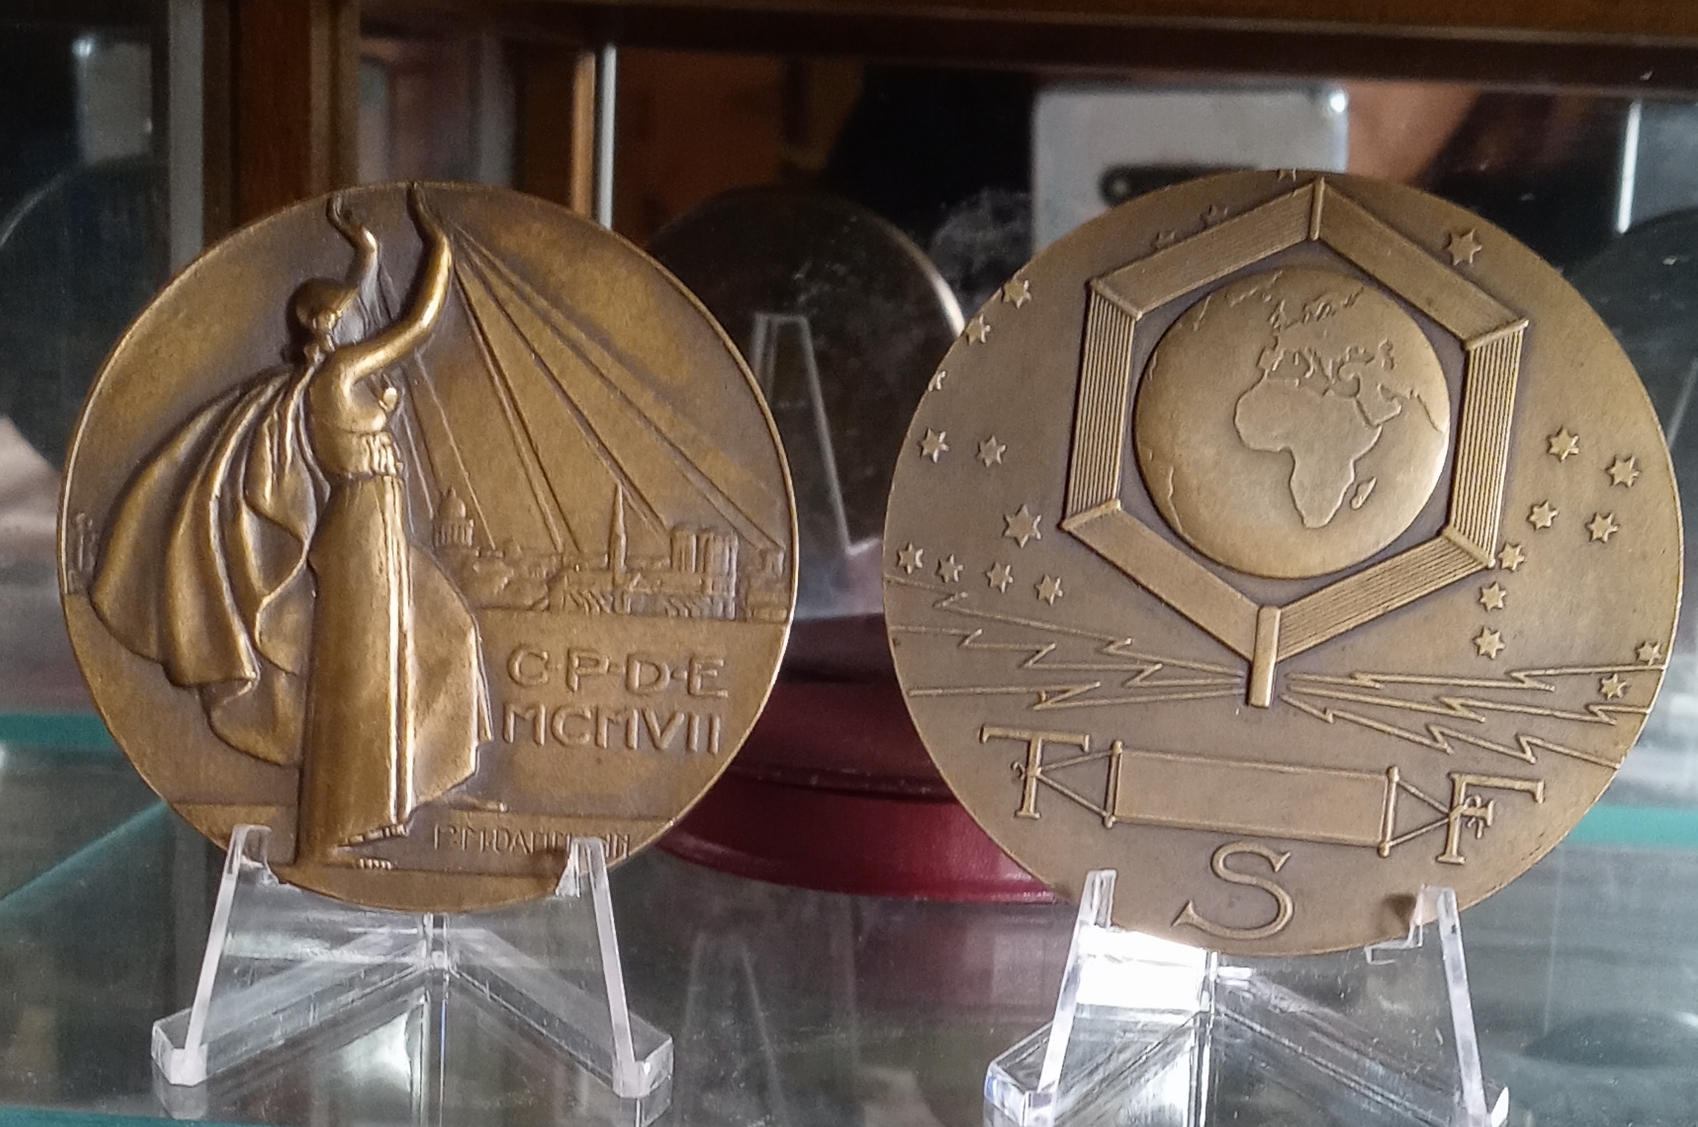 French Art Deco Medals Revs 1 cropped.jpg